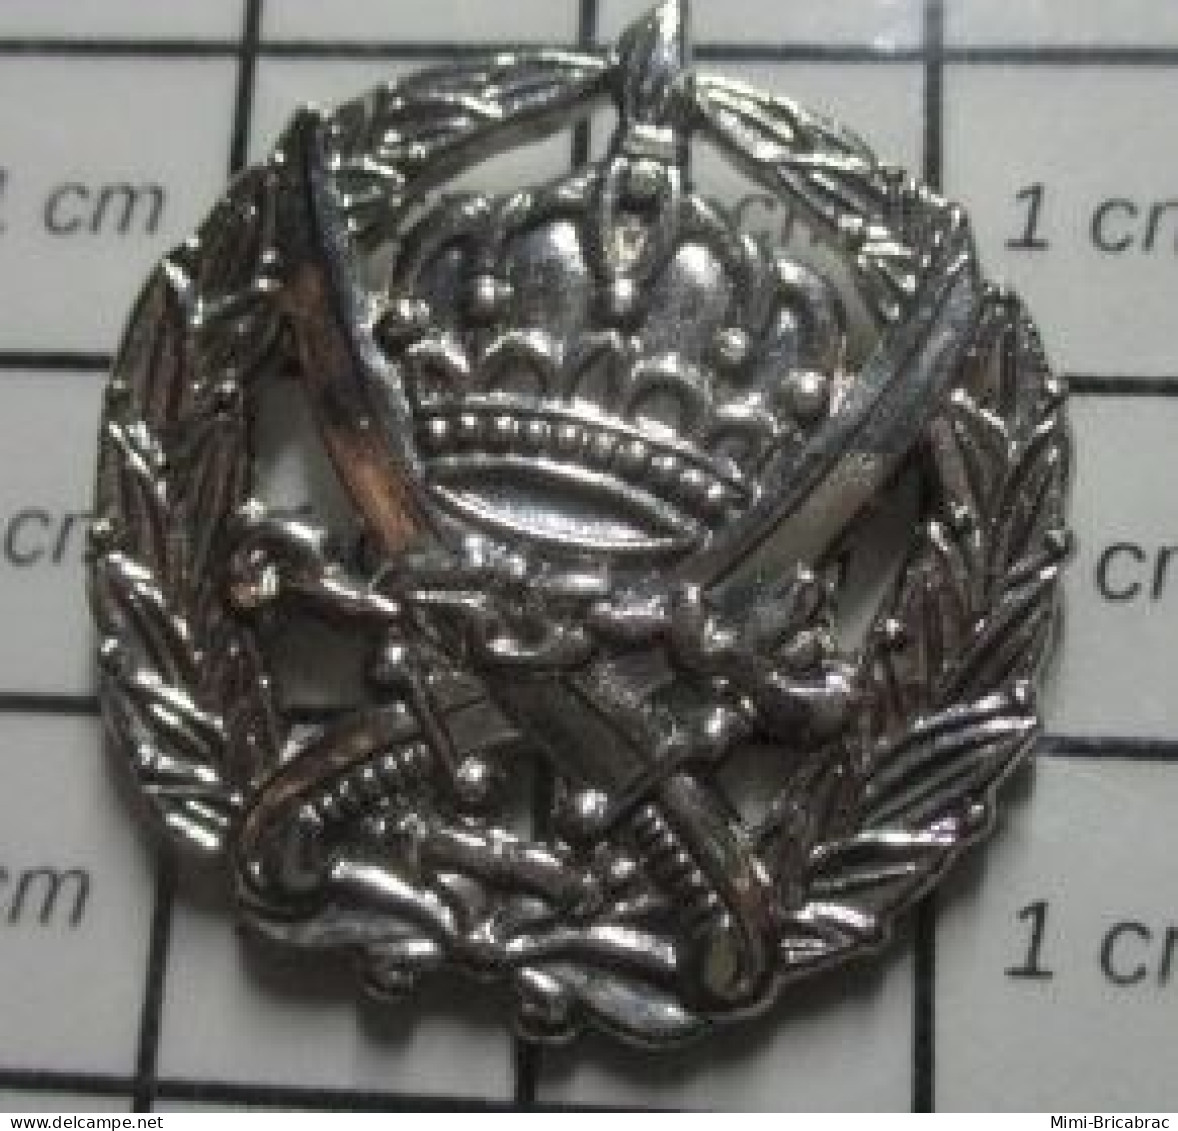 1920 Pin's Pins / Beau Et Rare / MILITARIA / INSIGNE METAL ARGENT ARMEE ANGLAISE A IDENTIFIER - Army